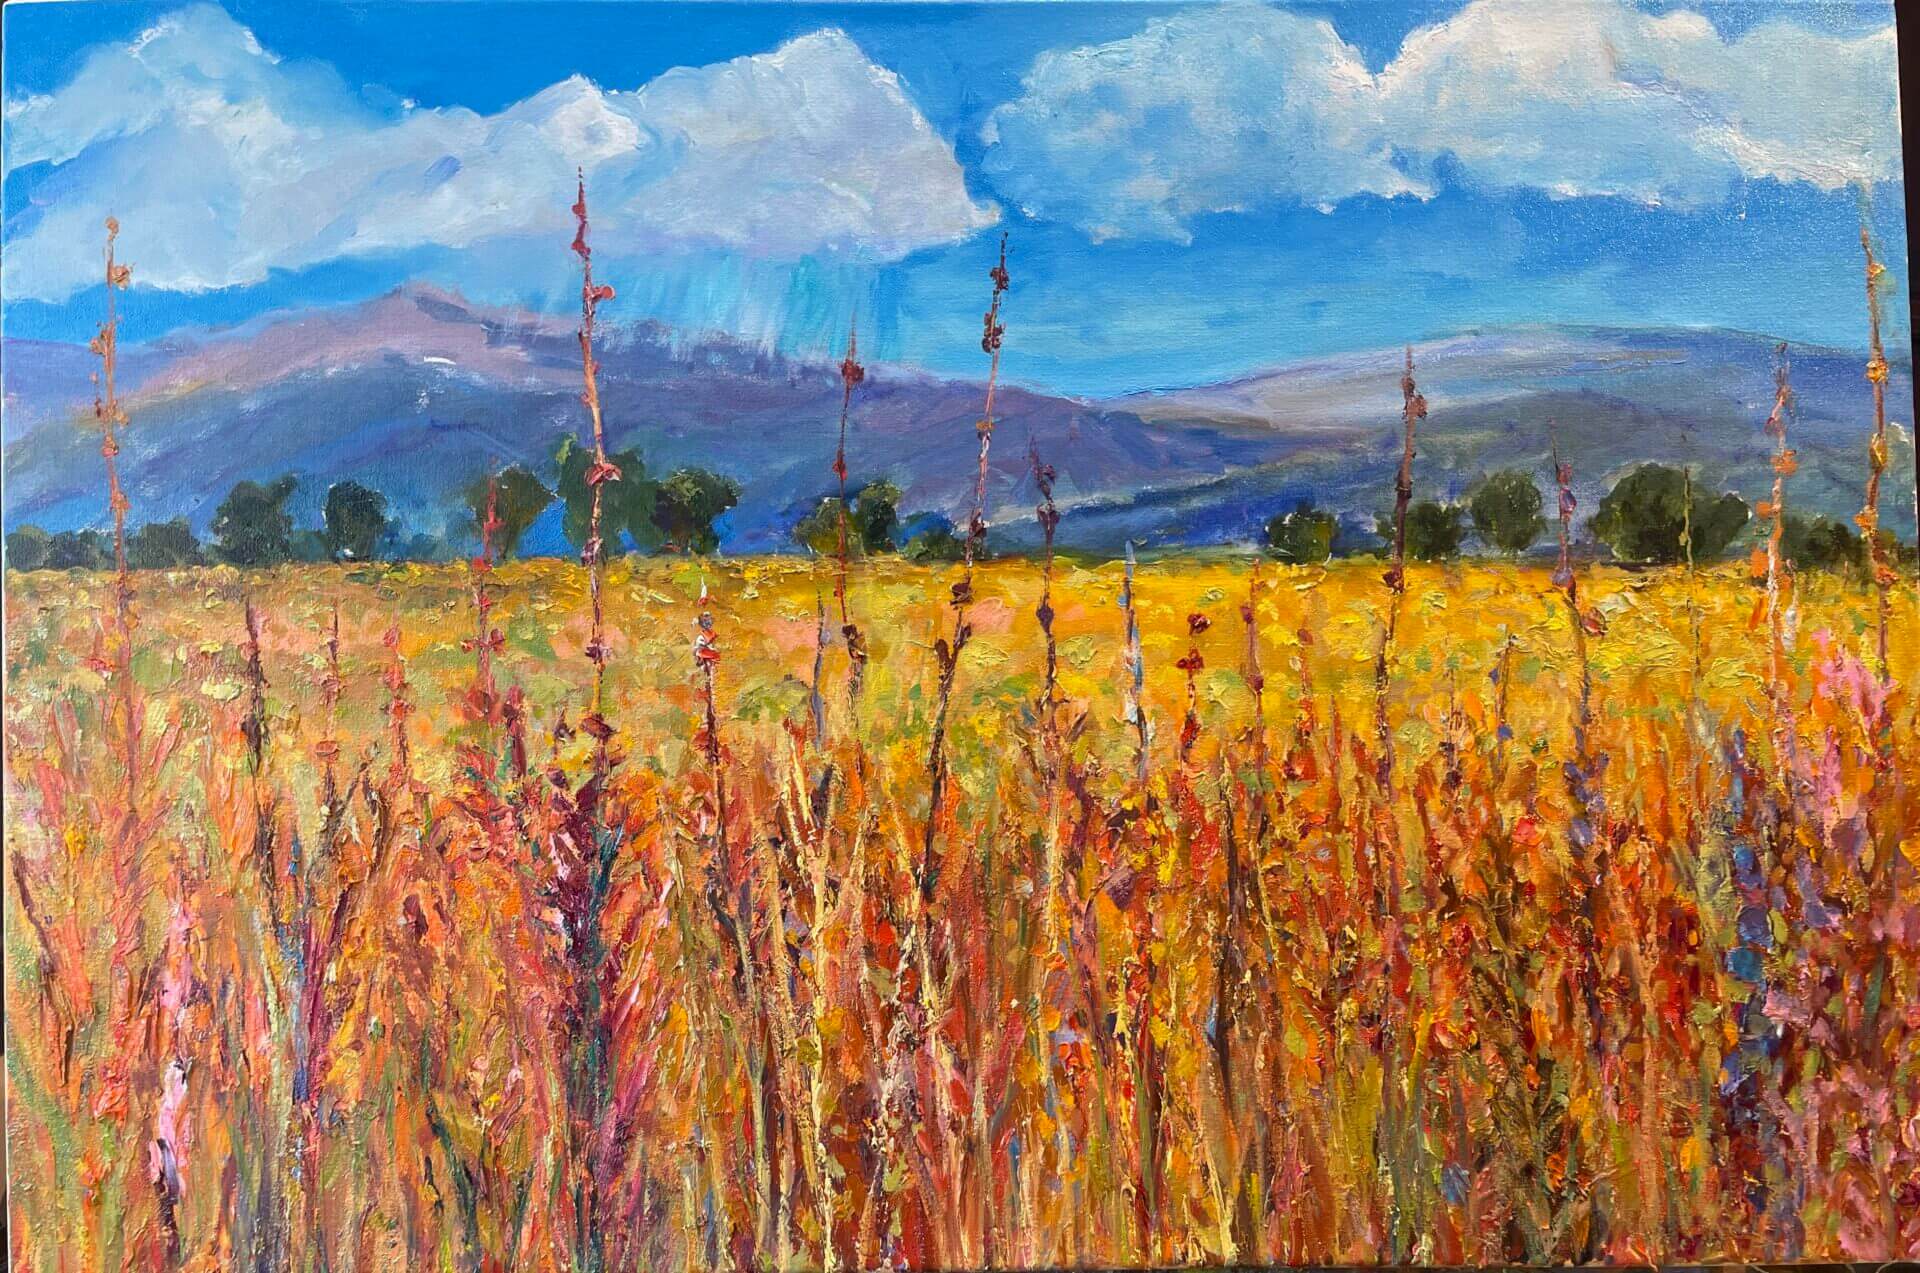 Walking Rain Thistle Field Oil Painting available for sale